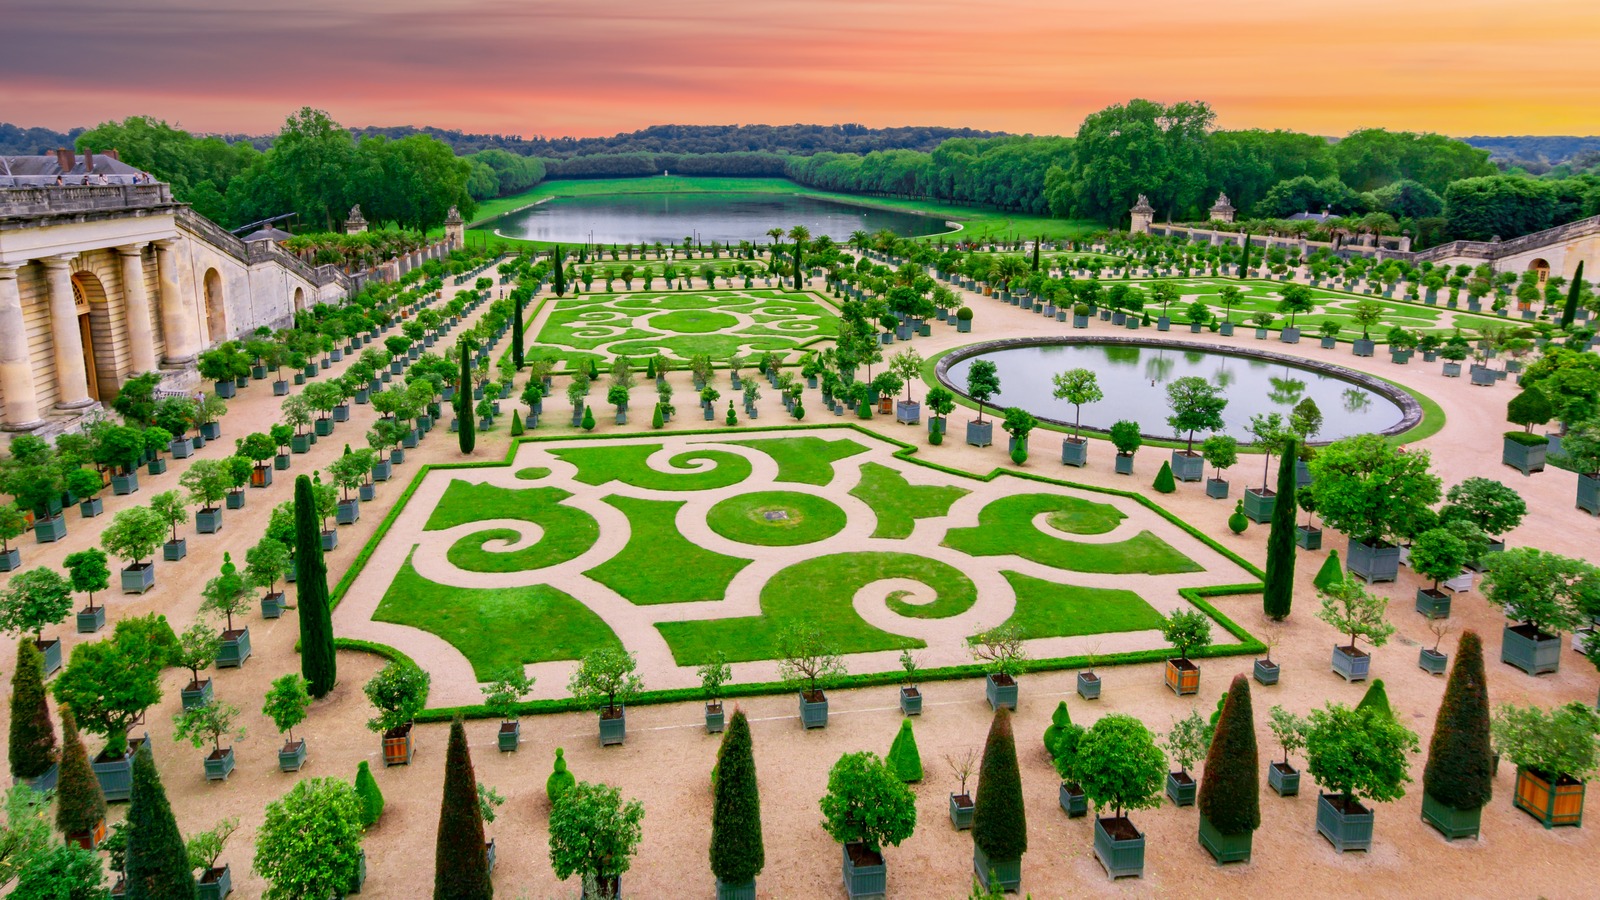 15 Ways To Incorporate Lush Ideas From The Castle Of Versailles Gardens